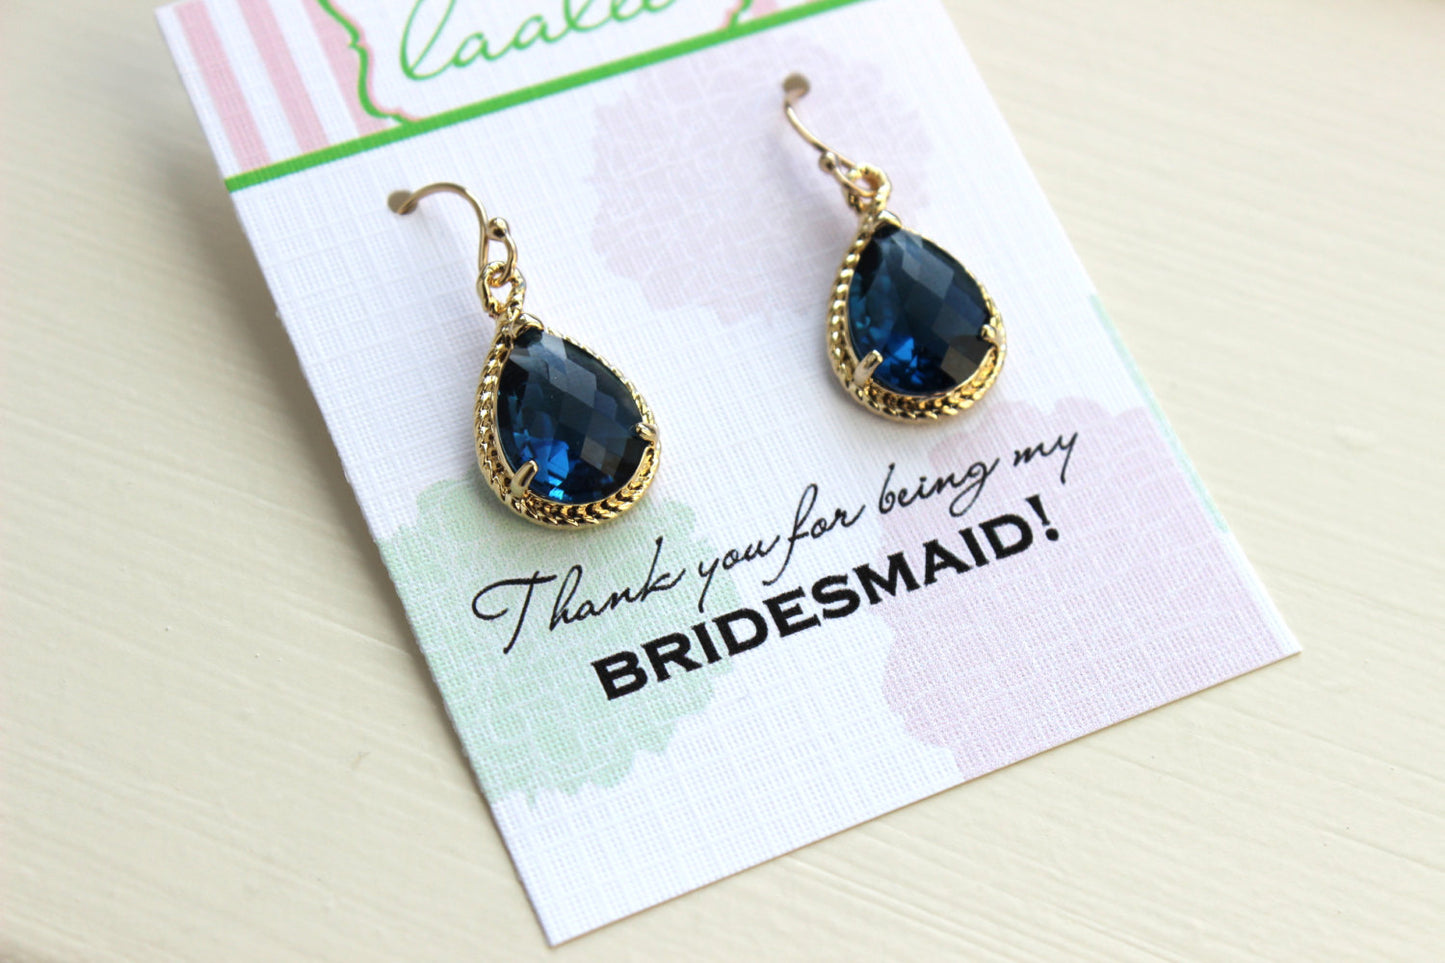 Sapphire Earrings Gold - Navy Blue Wedding Jewelry - Sapphire Bridesmaid Earrings Bridesmaid Gift Bridal Jewelry Personalized Thank You Note